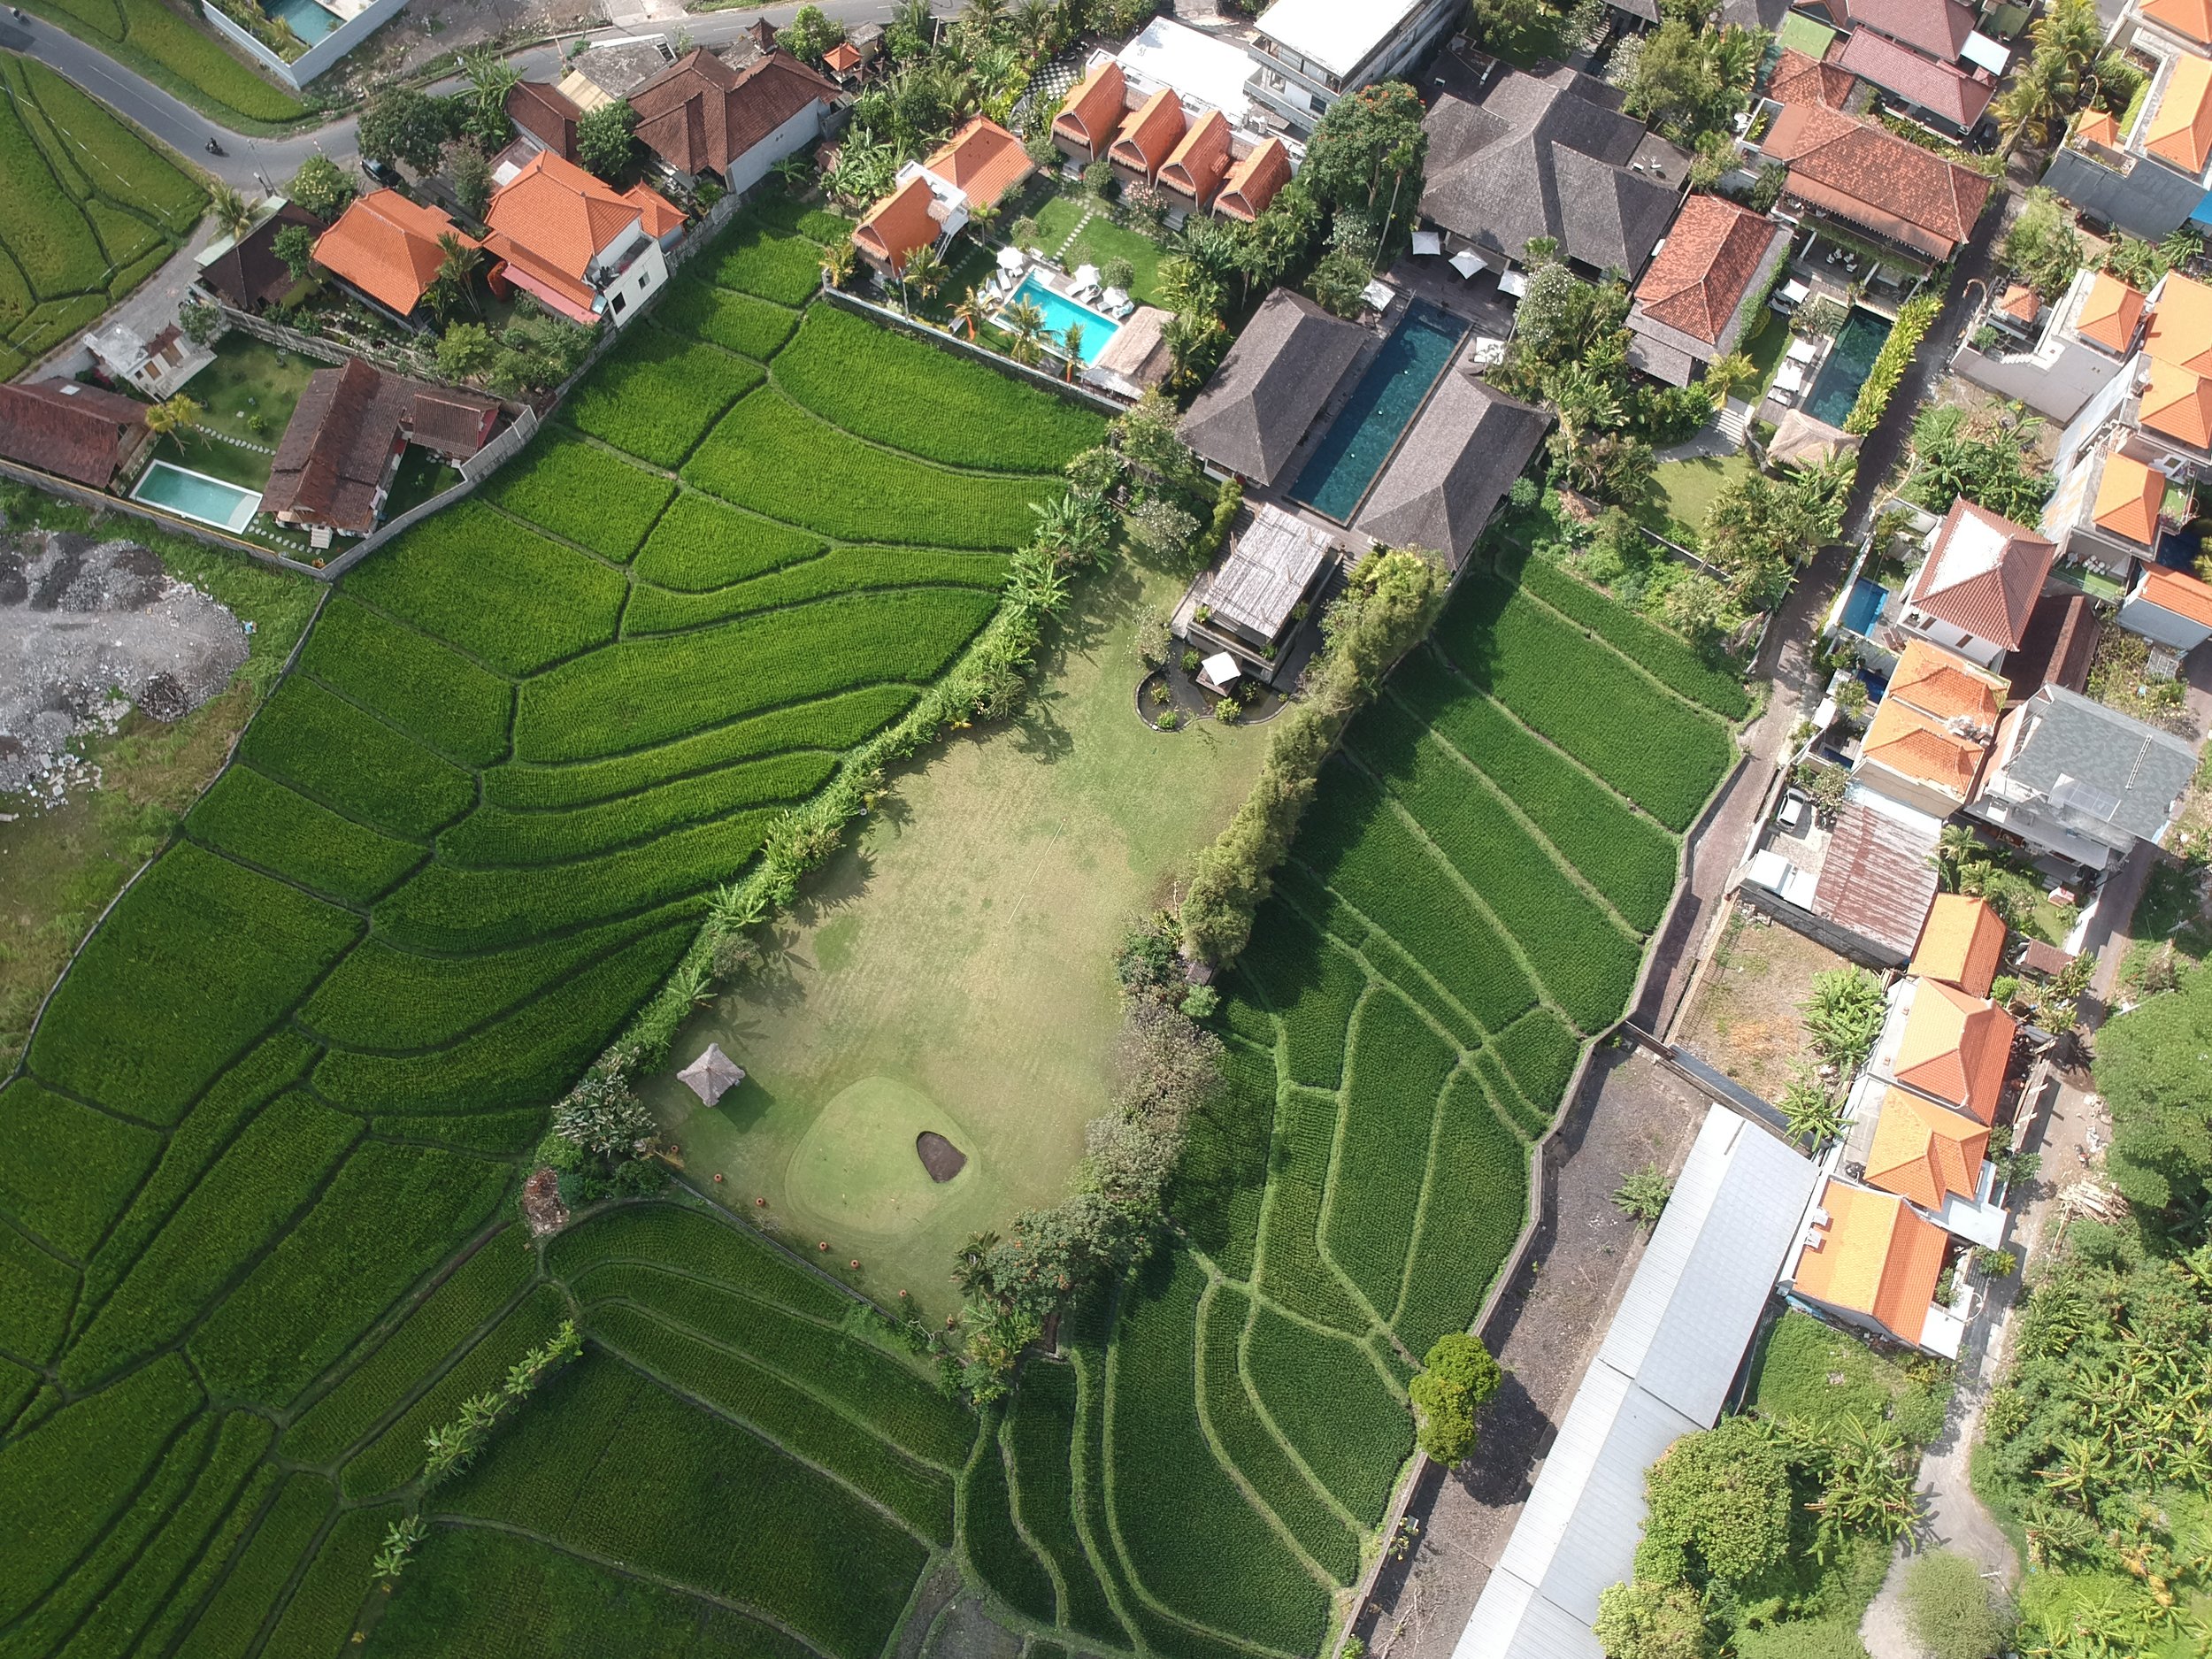 Overview of Mandalay Villa, Image from A Tent in Bali